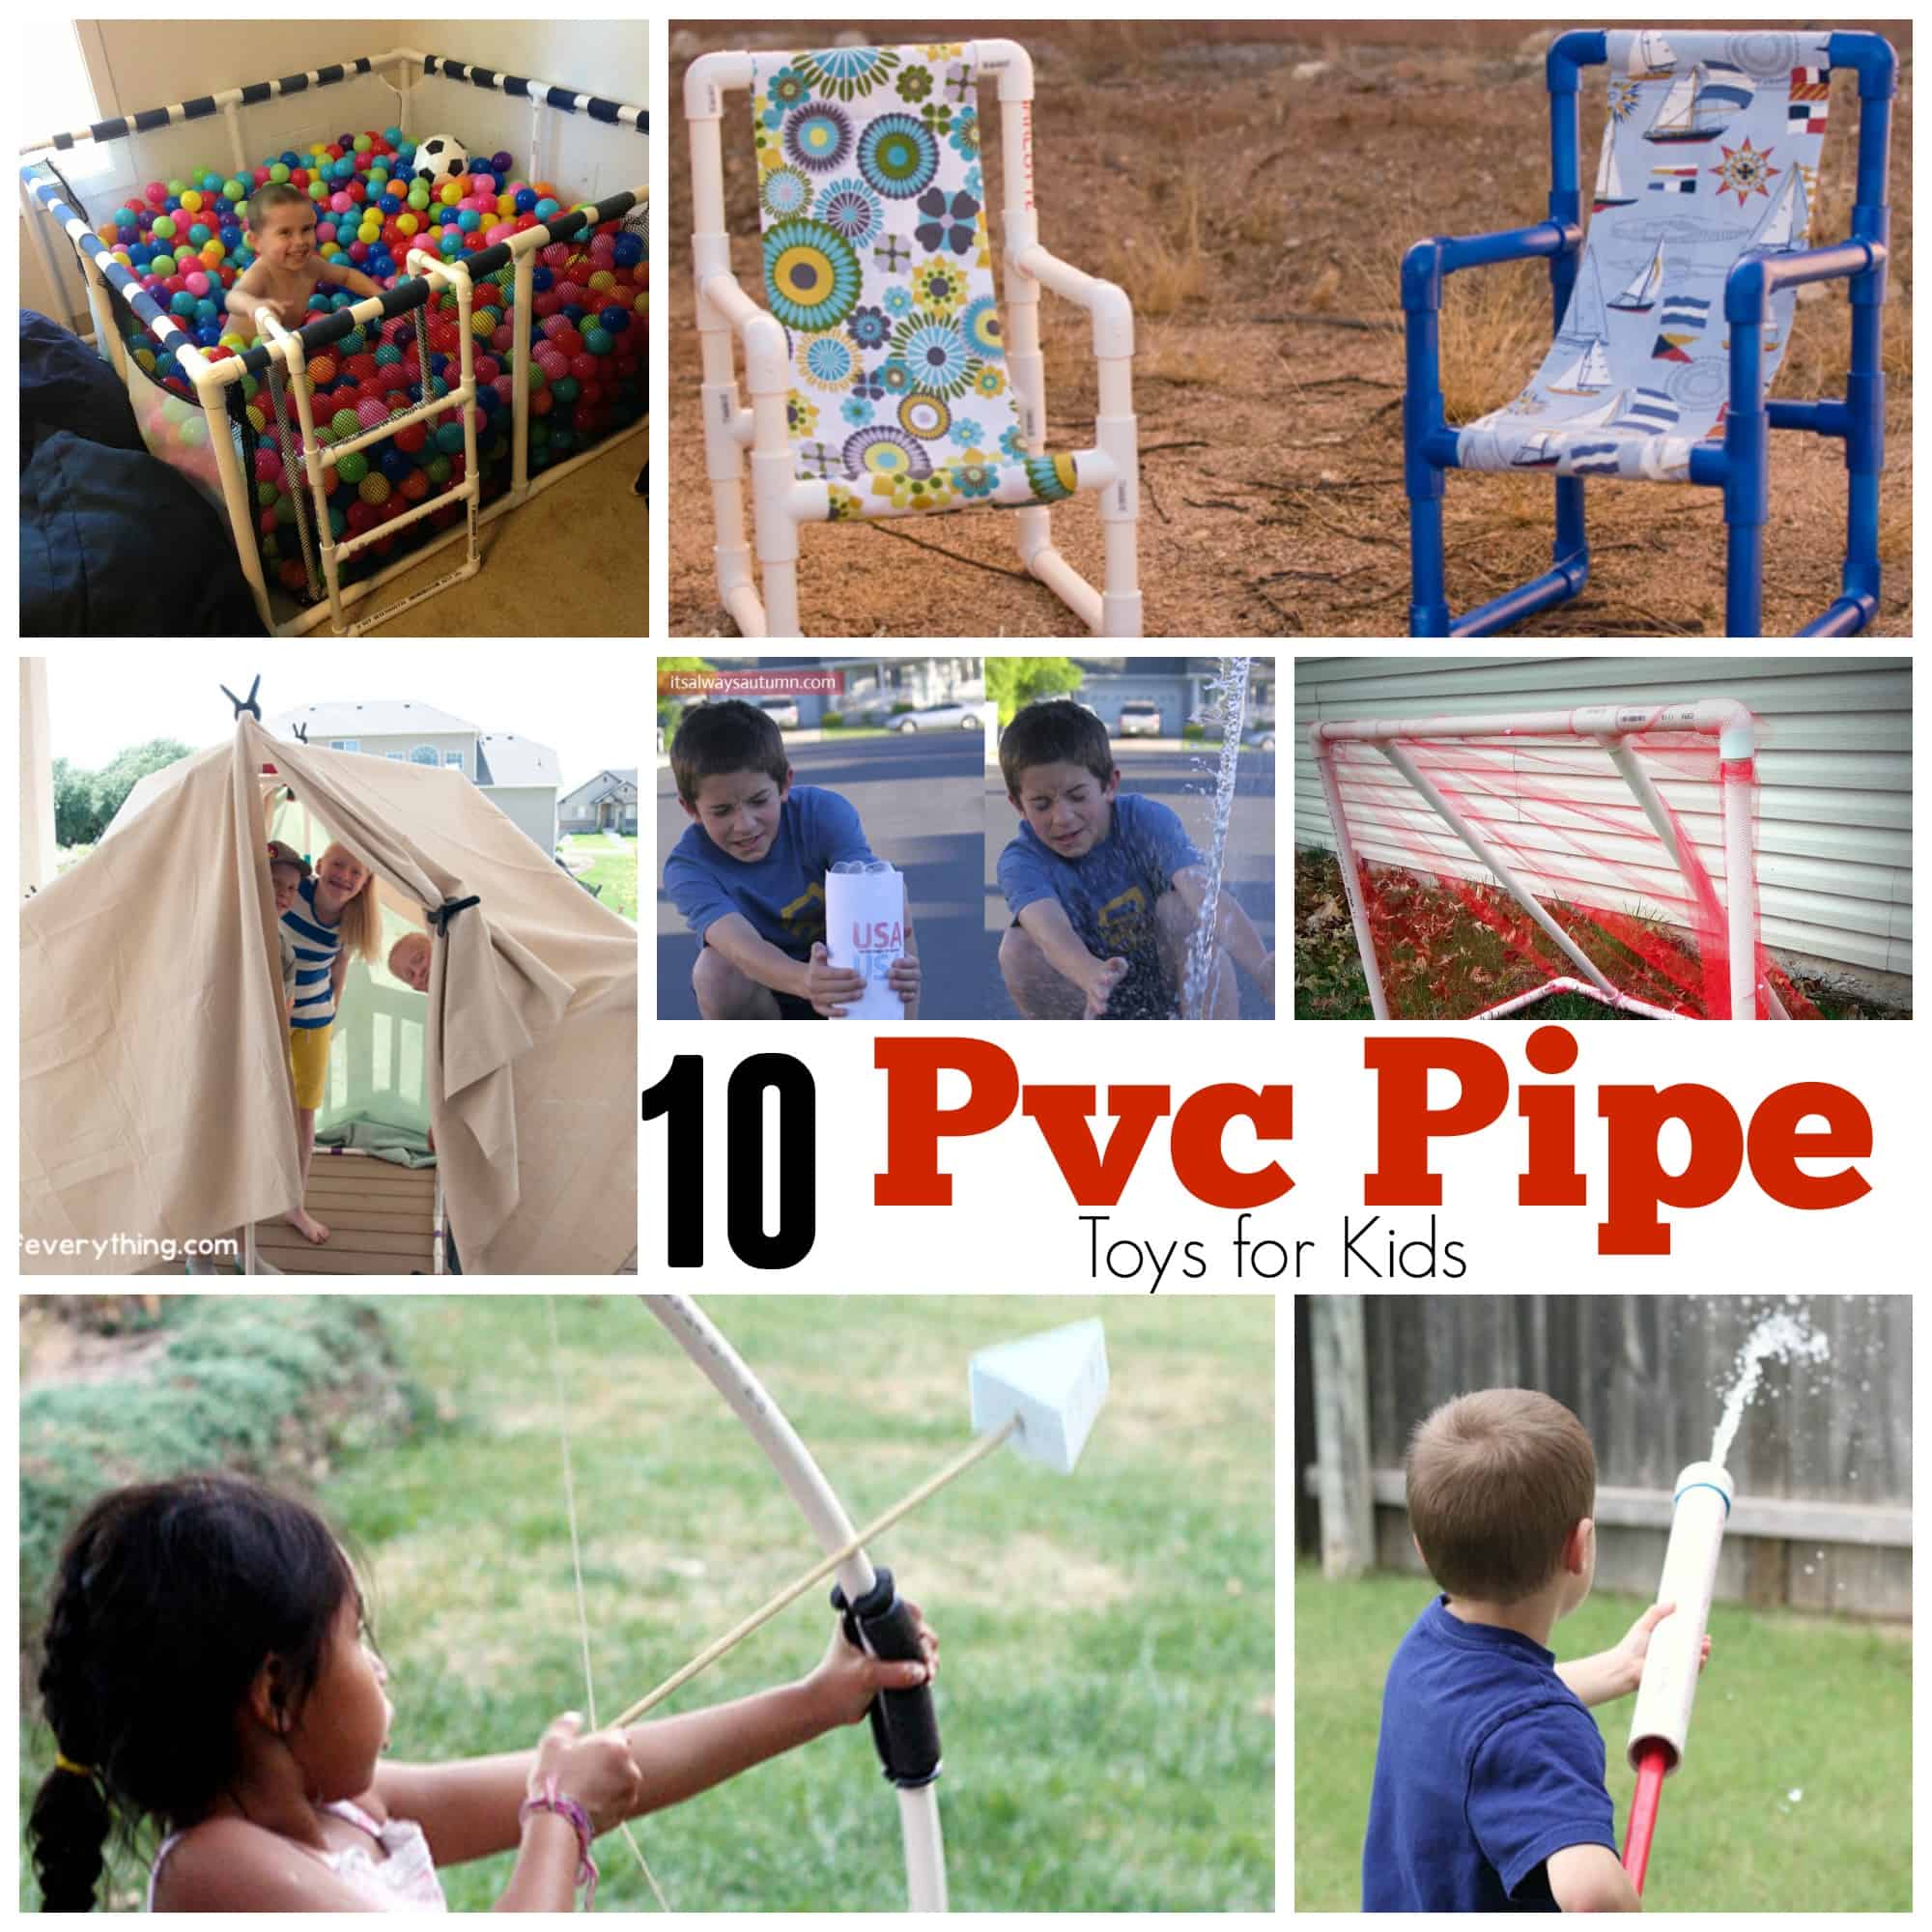 10 PVC Pipe Toys for Kids | Skip To My Lou2000 x 2000